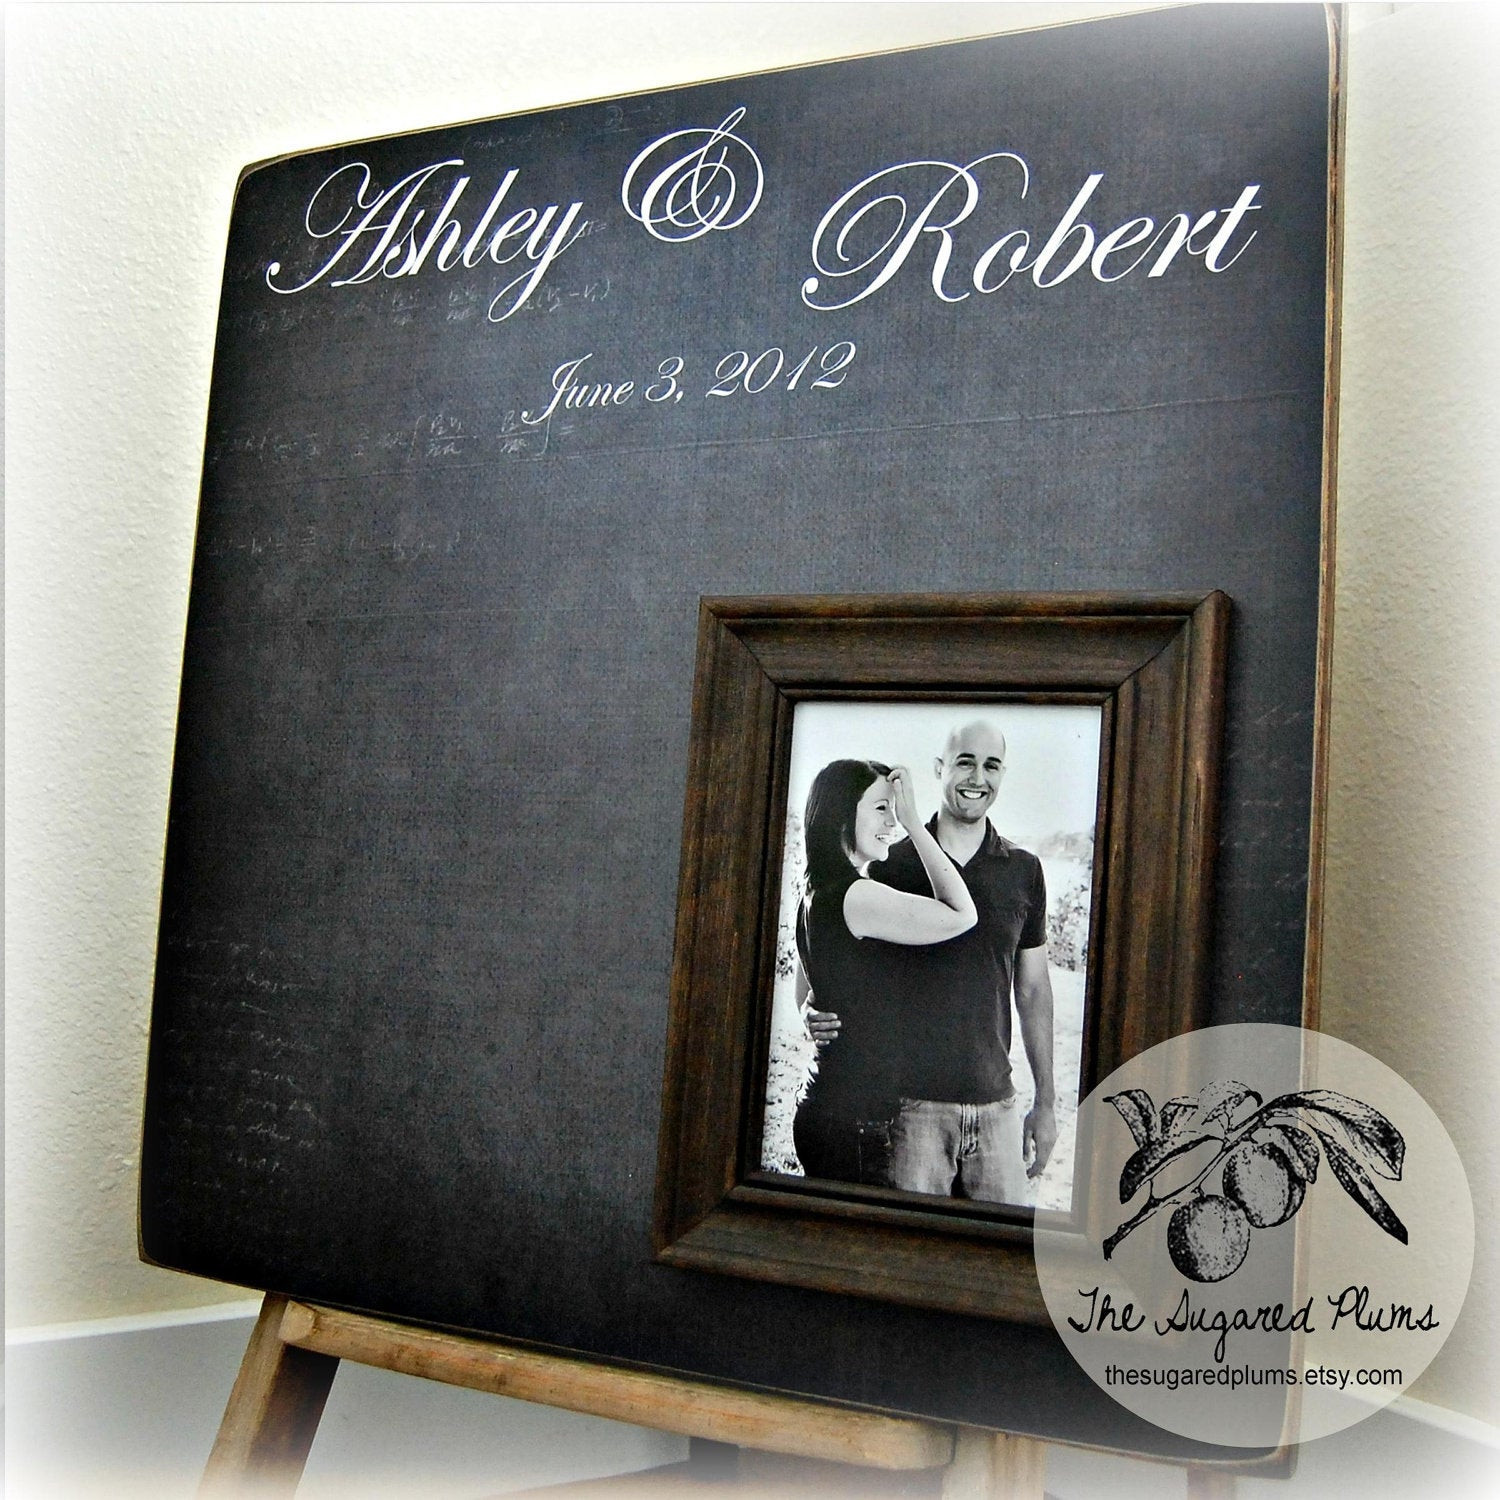 Wedding Guest Book Picture Frame
 Guest Book Wedding Personalized Picture Frame by